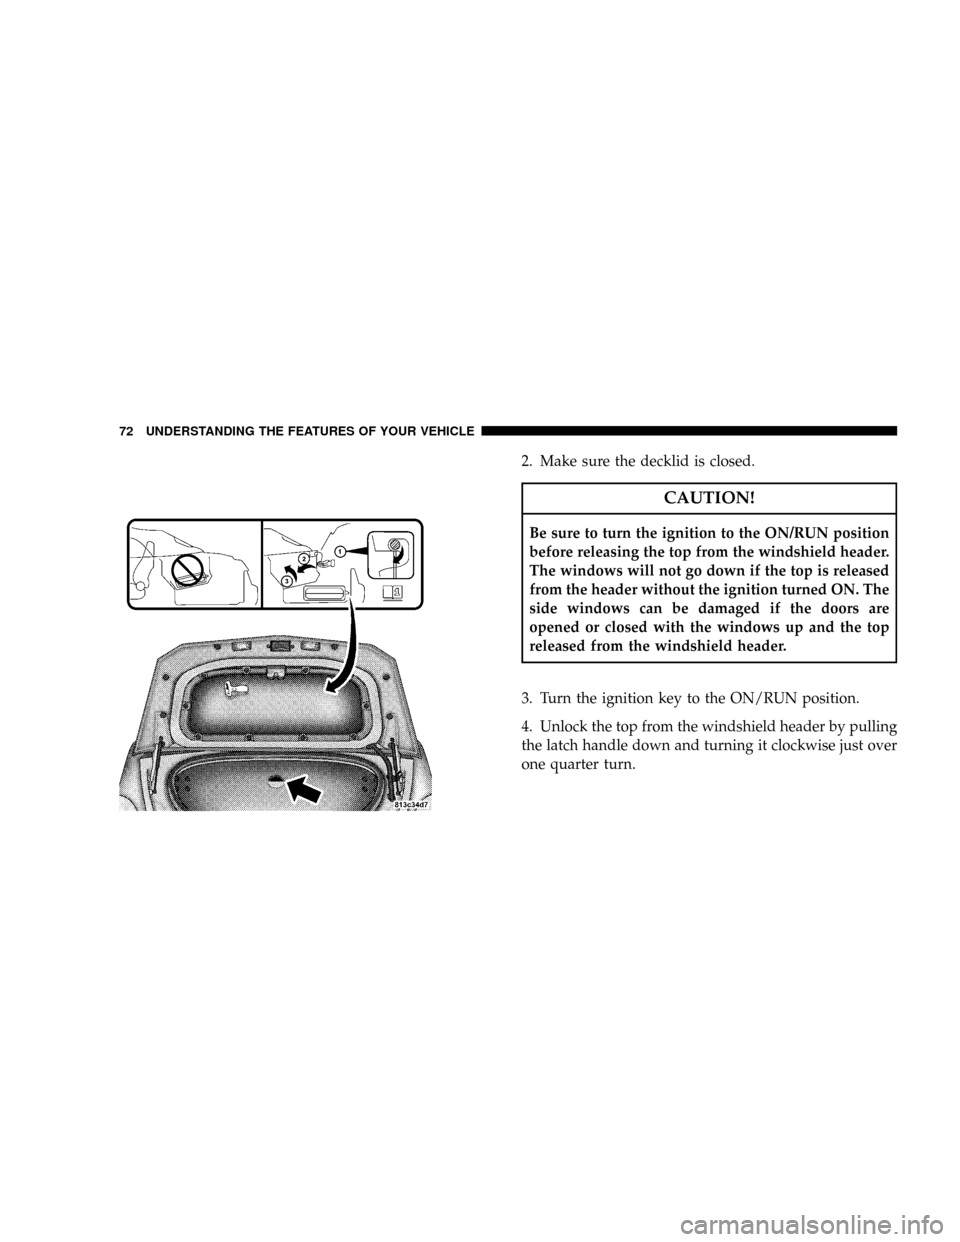 CHRYSLER CROSSFIRE 2008 1.G Manual PDF 2. Make sure the decklid is closed.
CAUTION!
Be sure to turn the ignition to the ON/RUN position
before releasing the top from the windshield header.
The windows will not go down if the top is release